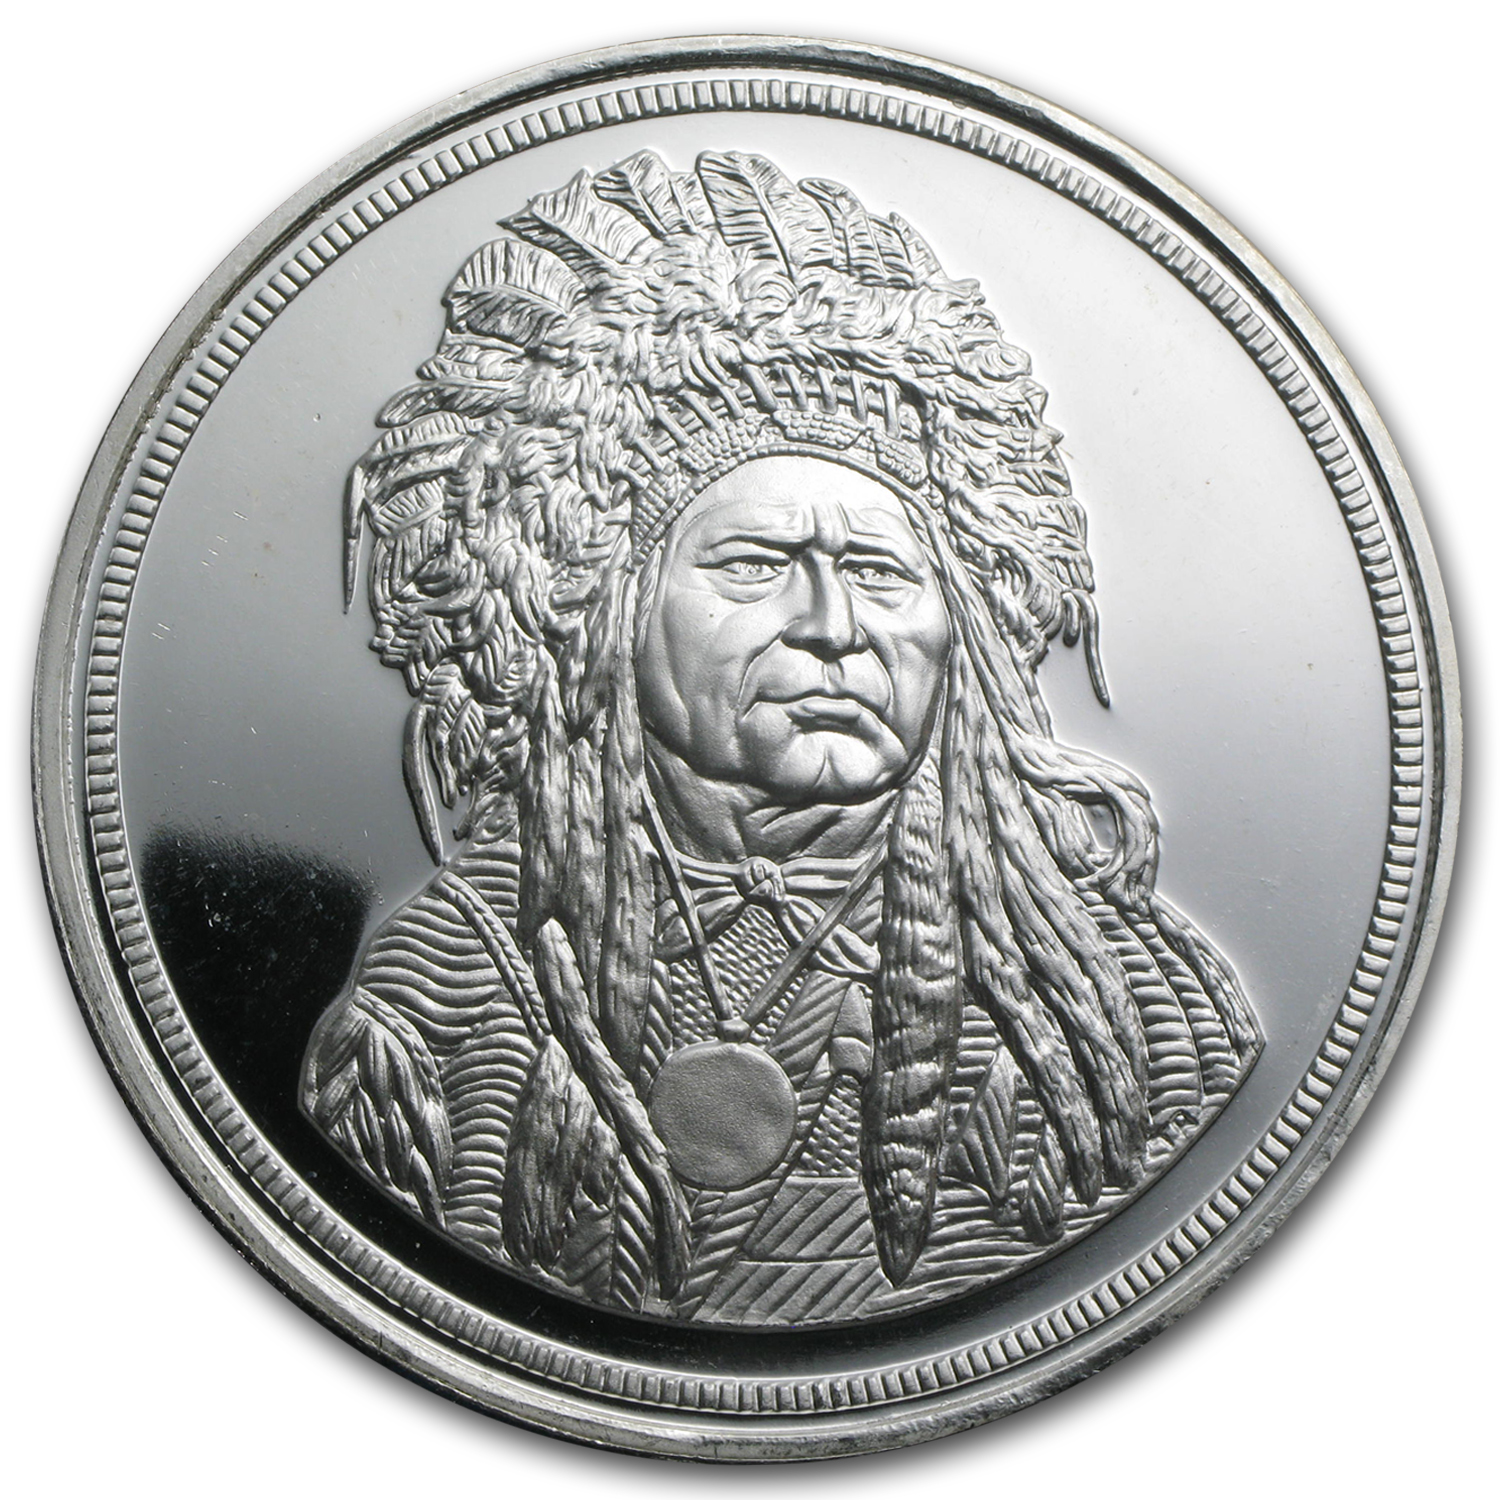 Buy 5 oz Silver Round - Running Antelope (The Silver Chief) | APMEX